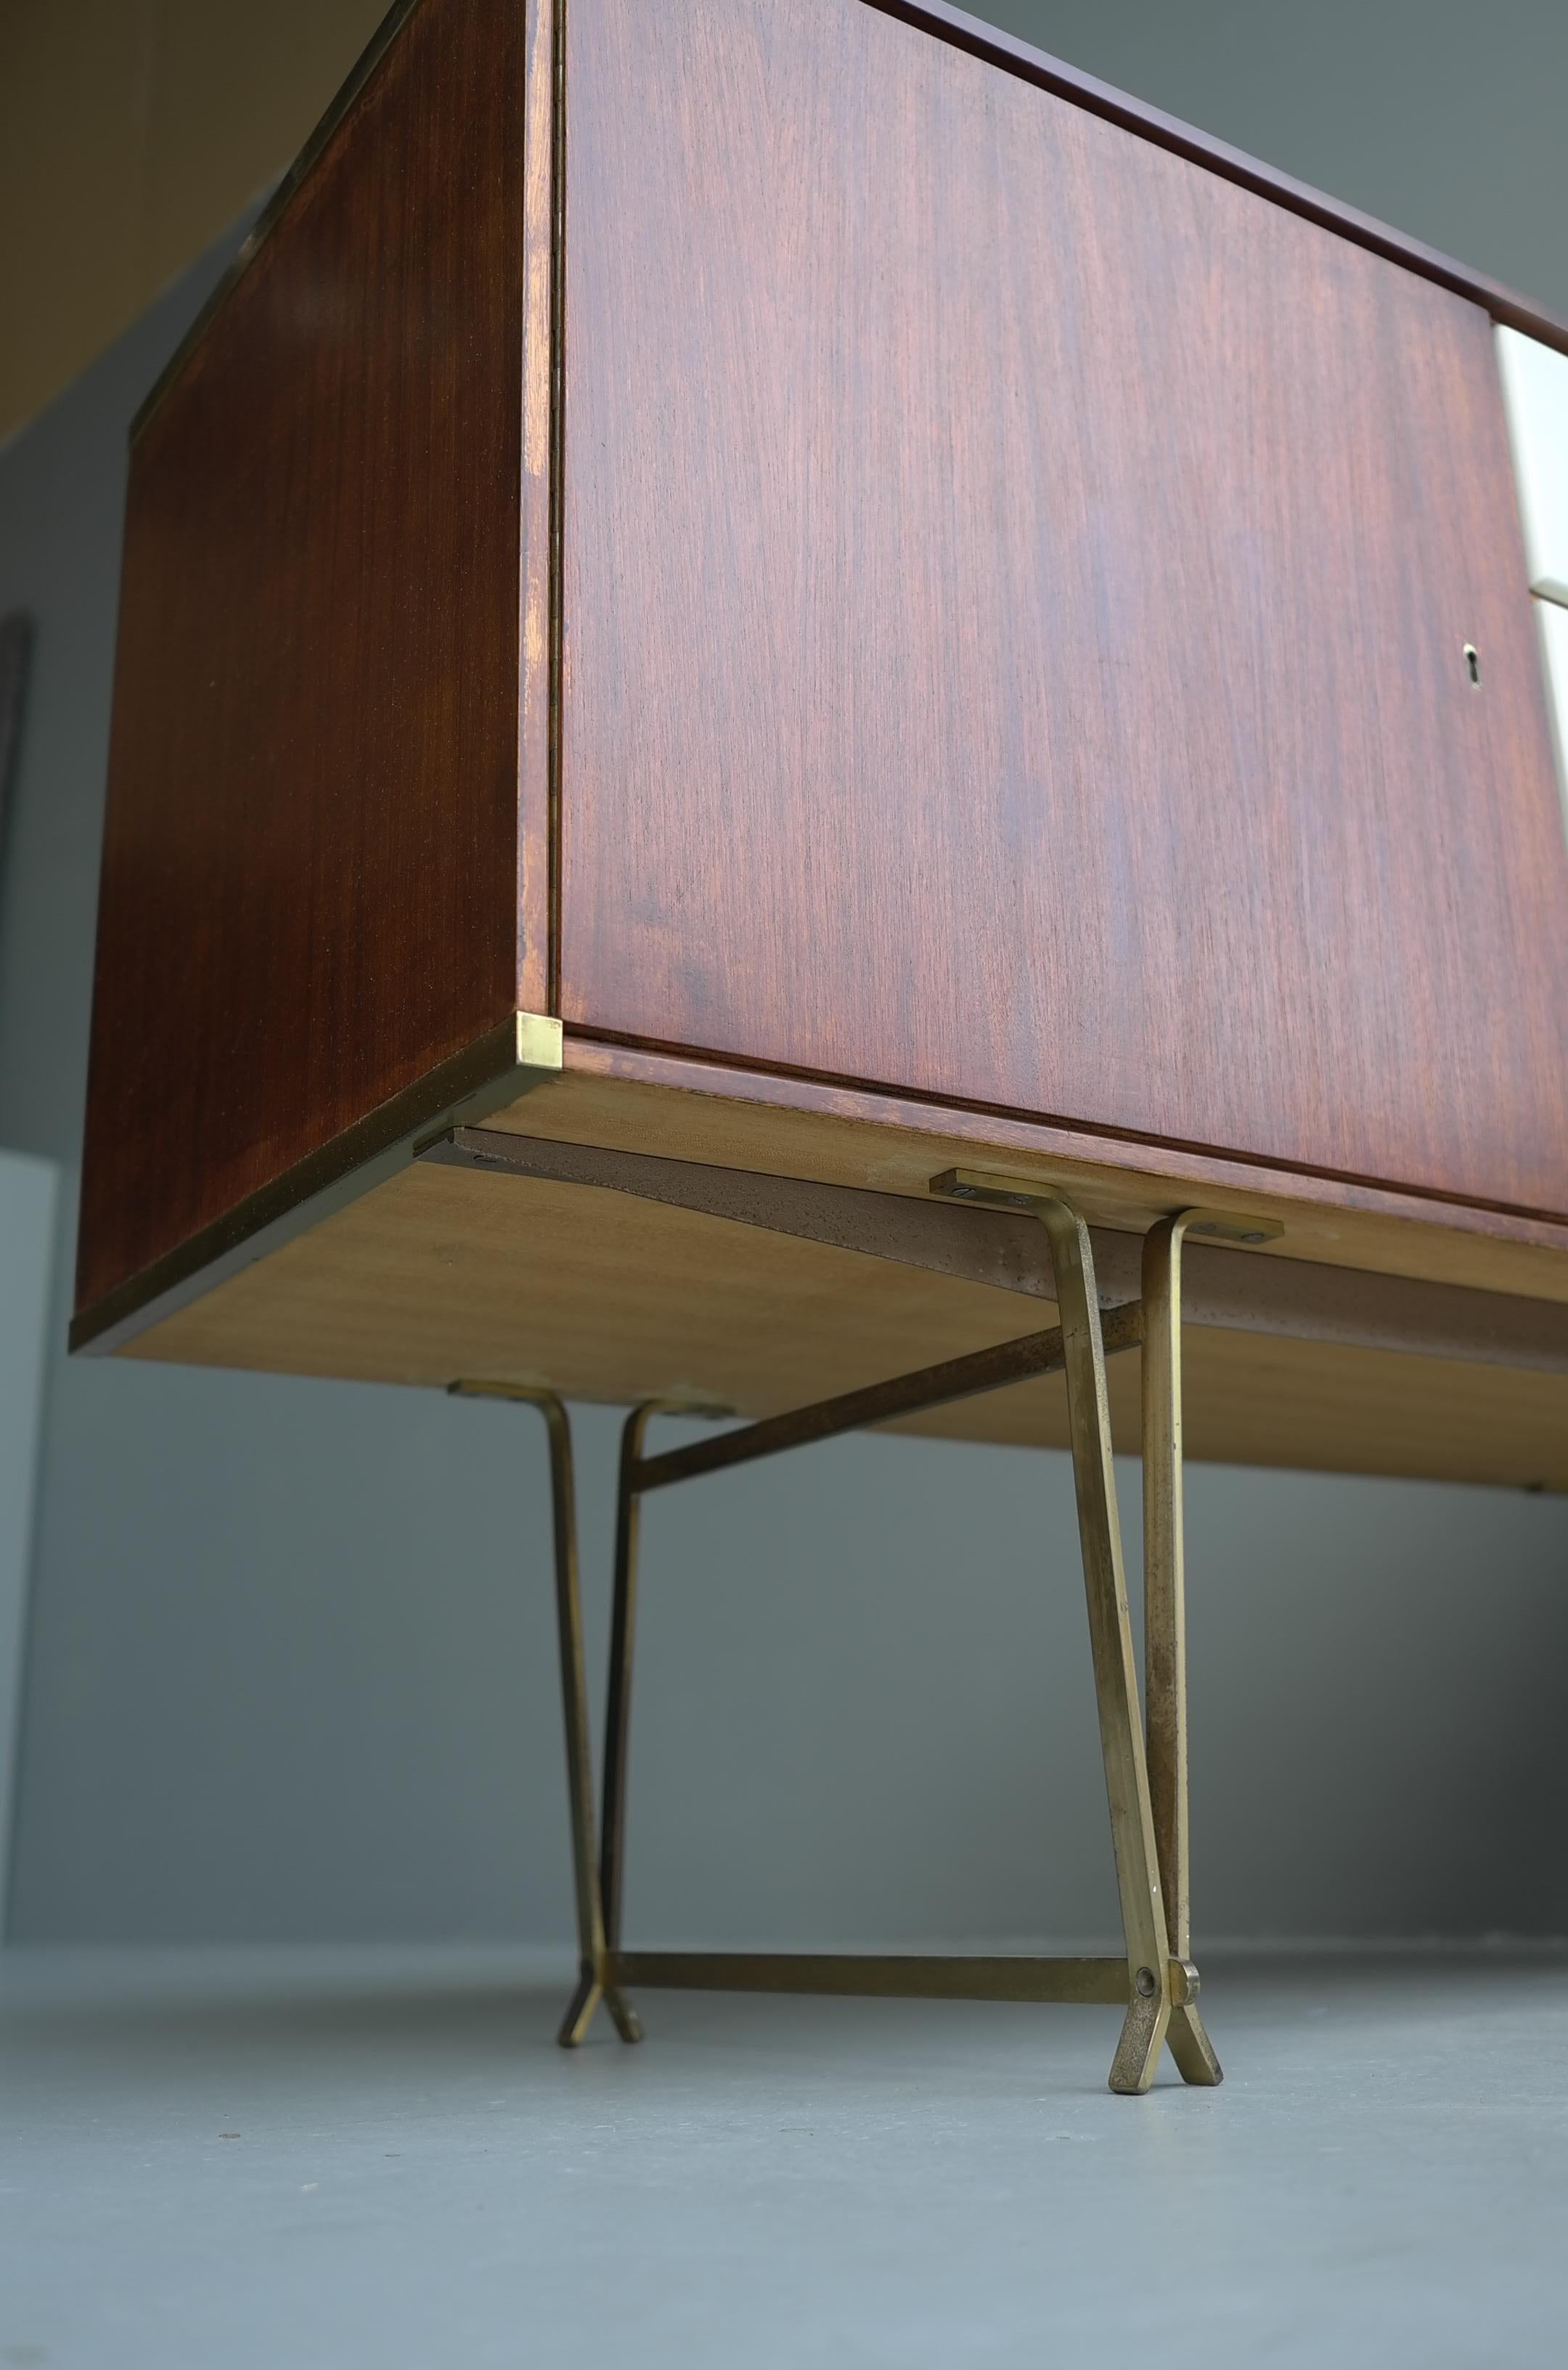 Dutch Fristho Sideboard by Wim Crouwel in Teak and White, with Fine Brass Leggs, 1954